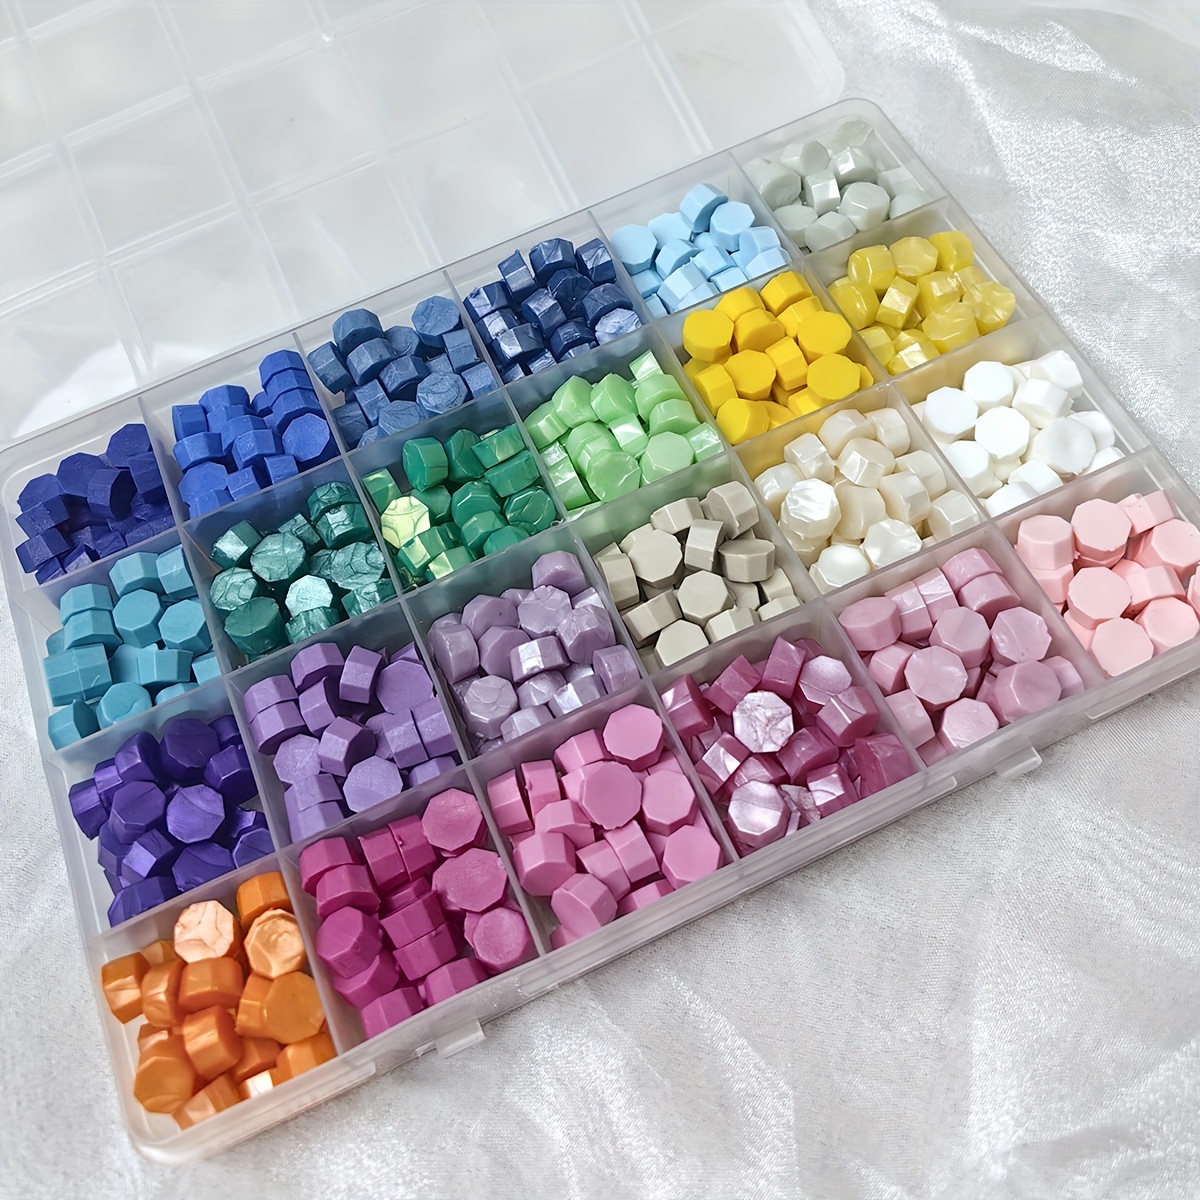  378 Pieces Sealing Wax Beads Set Wax Beads for Stamp Seals  Octagon Wax Seal Stamp Particles Kit in a Plastic Box 15 Grids 15 Colors  Seal Wax Pellets : Arts, Crafts & Sewing